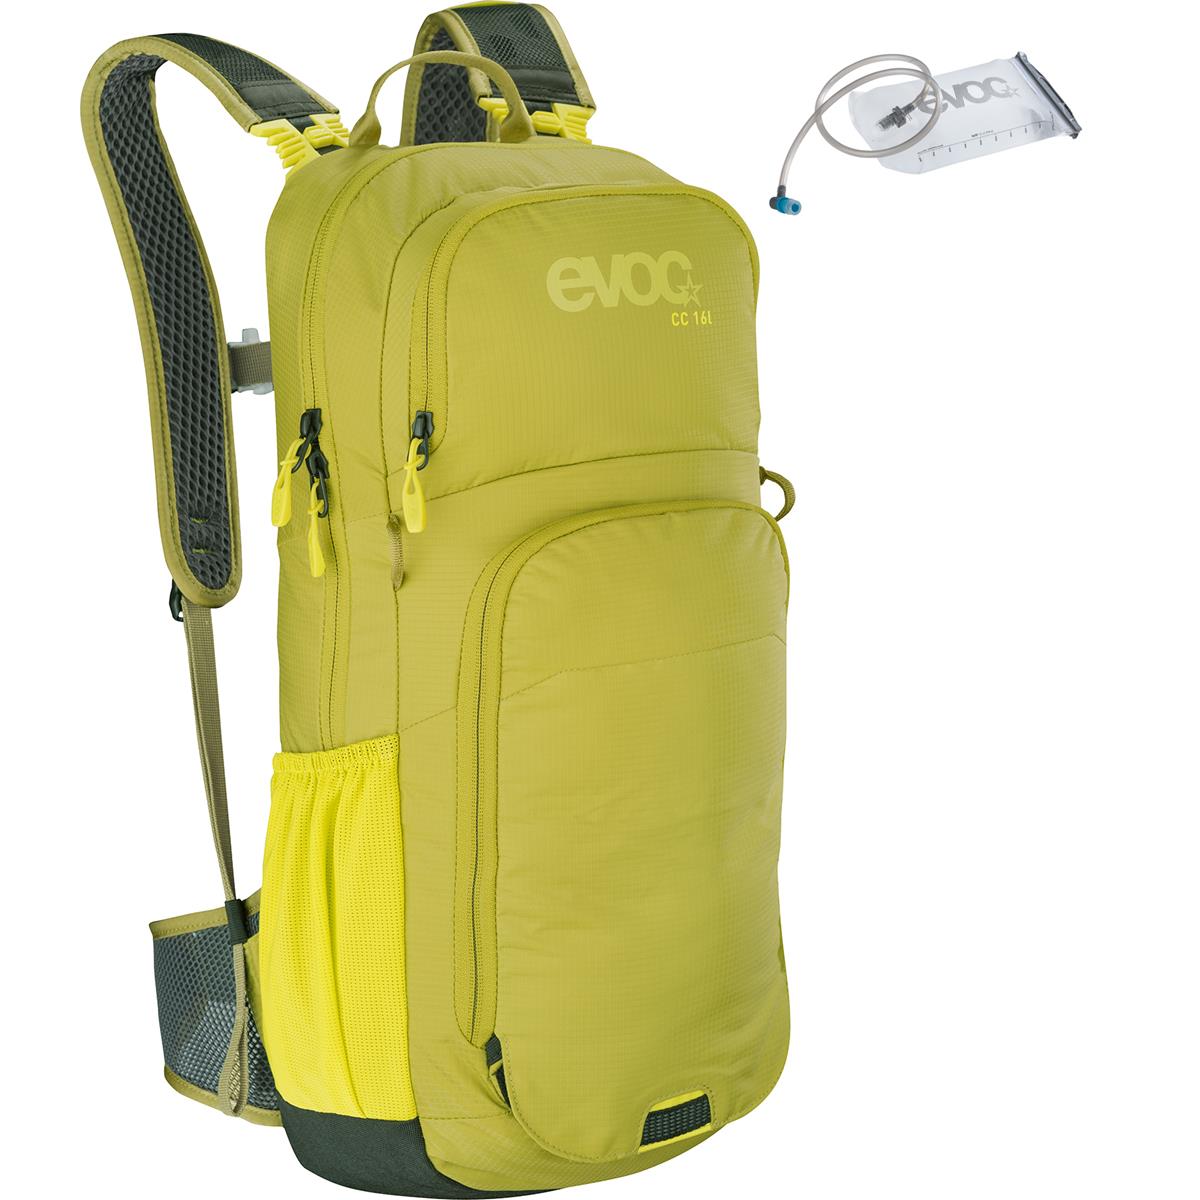 Evoc Hydration Pack Cross Country Moss Green 16 Liters